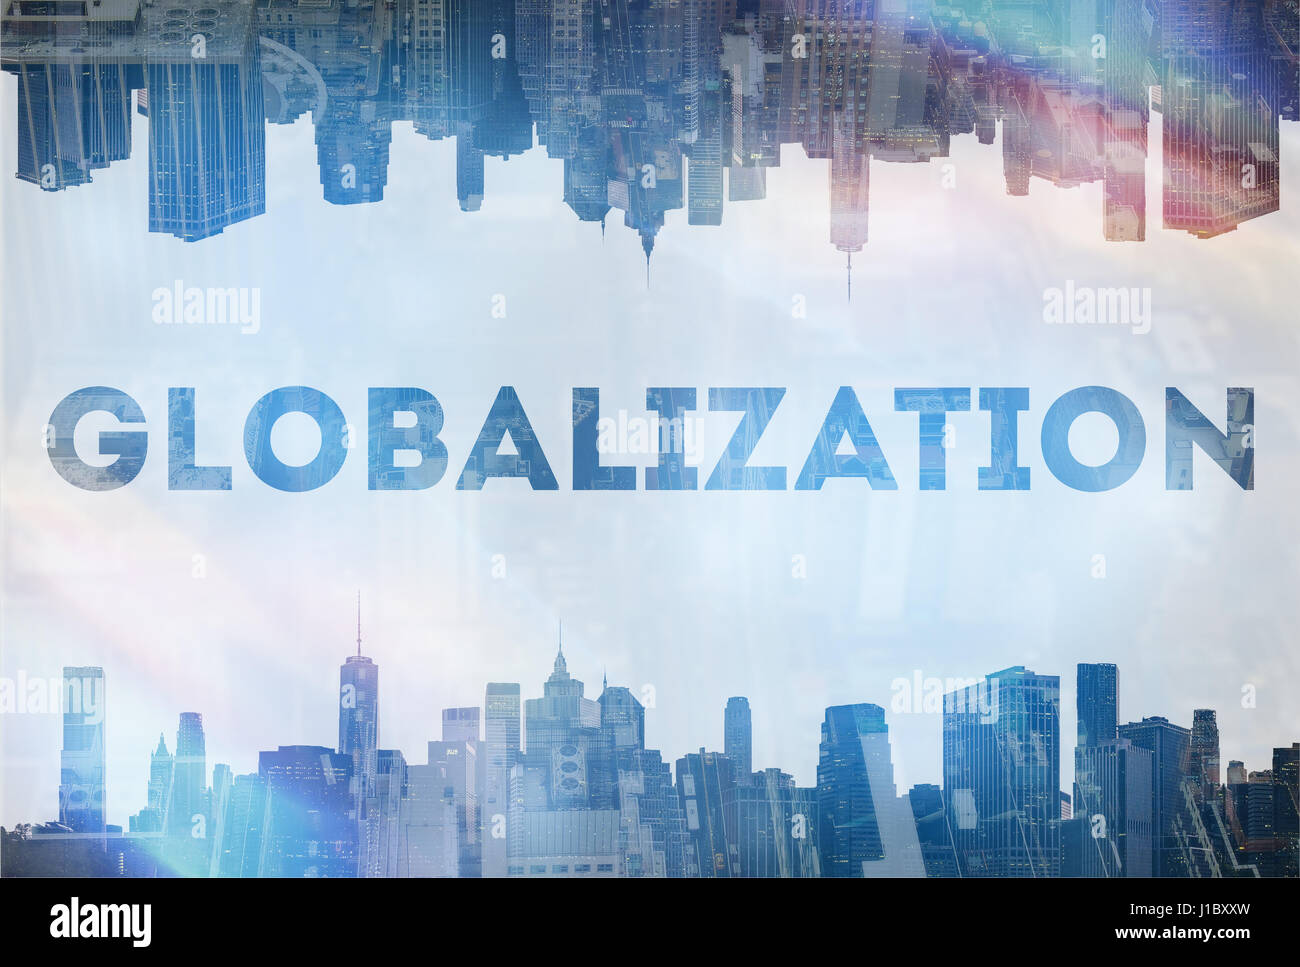 Globalization concept image Stock Photo